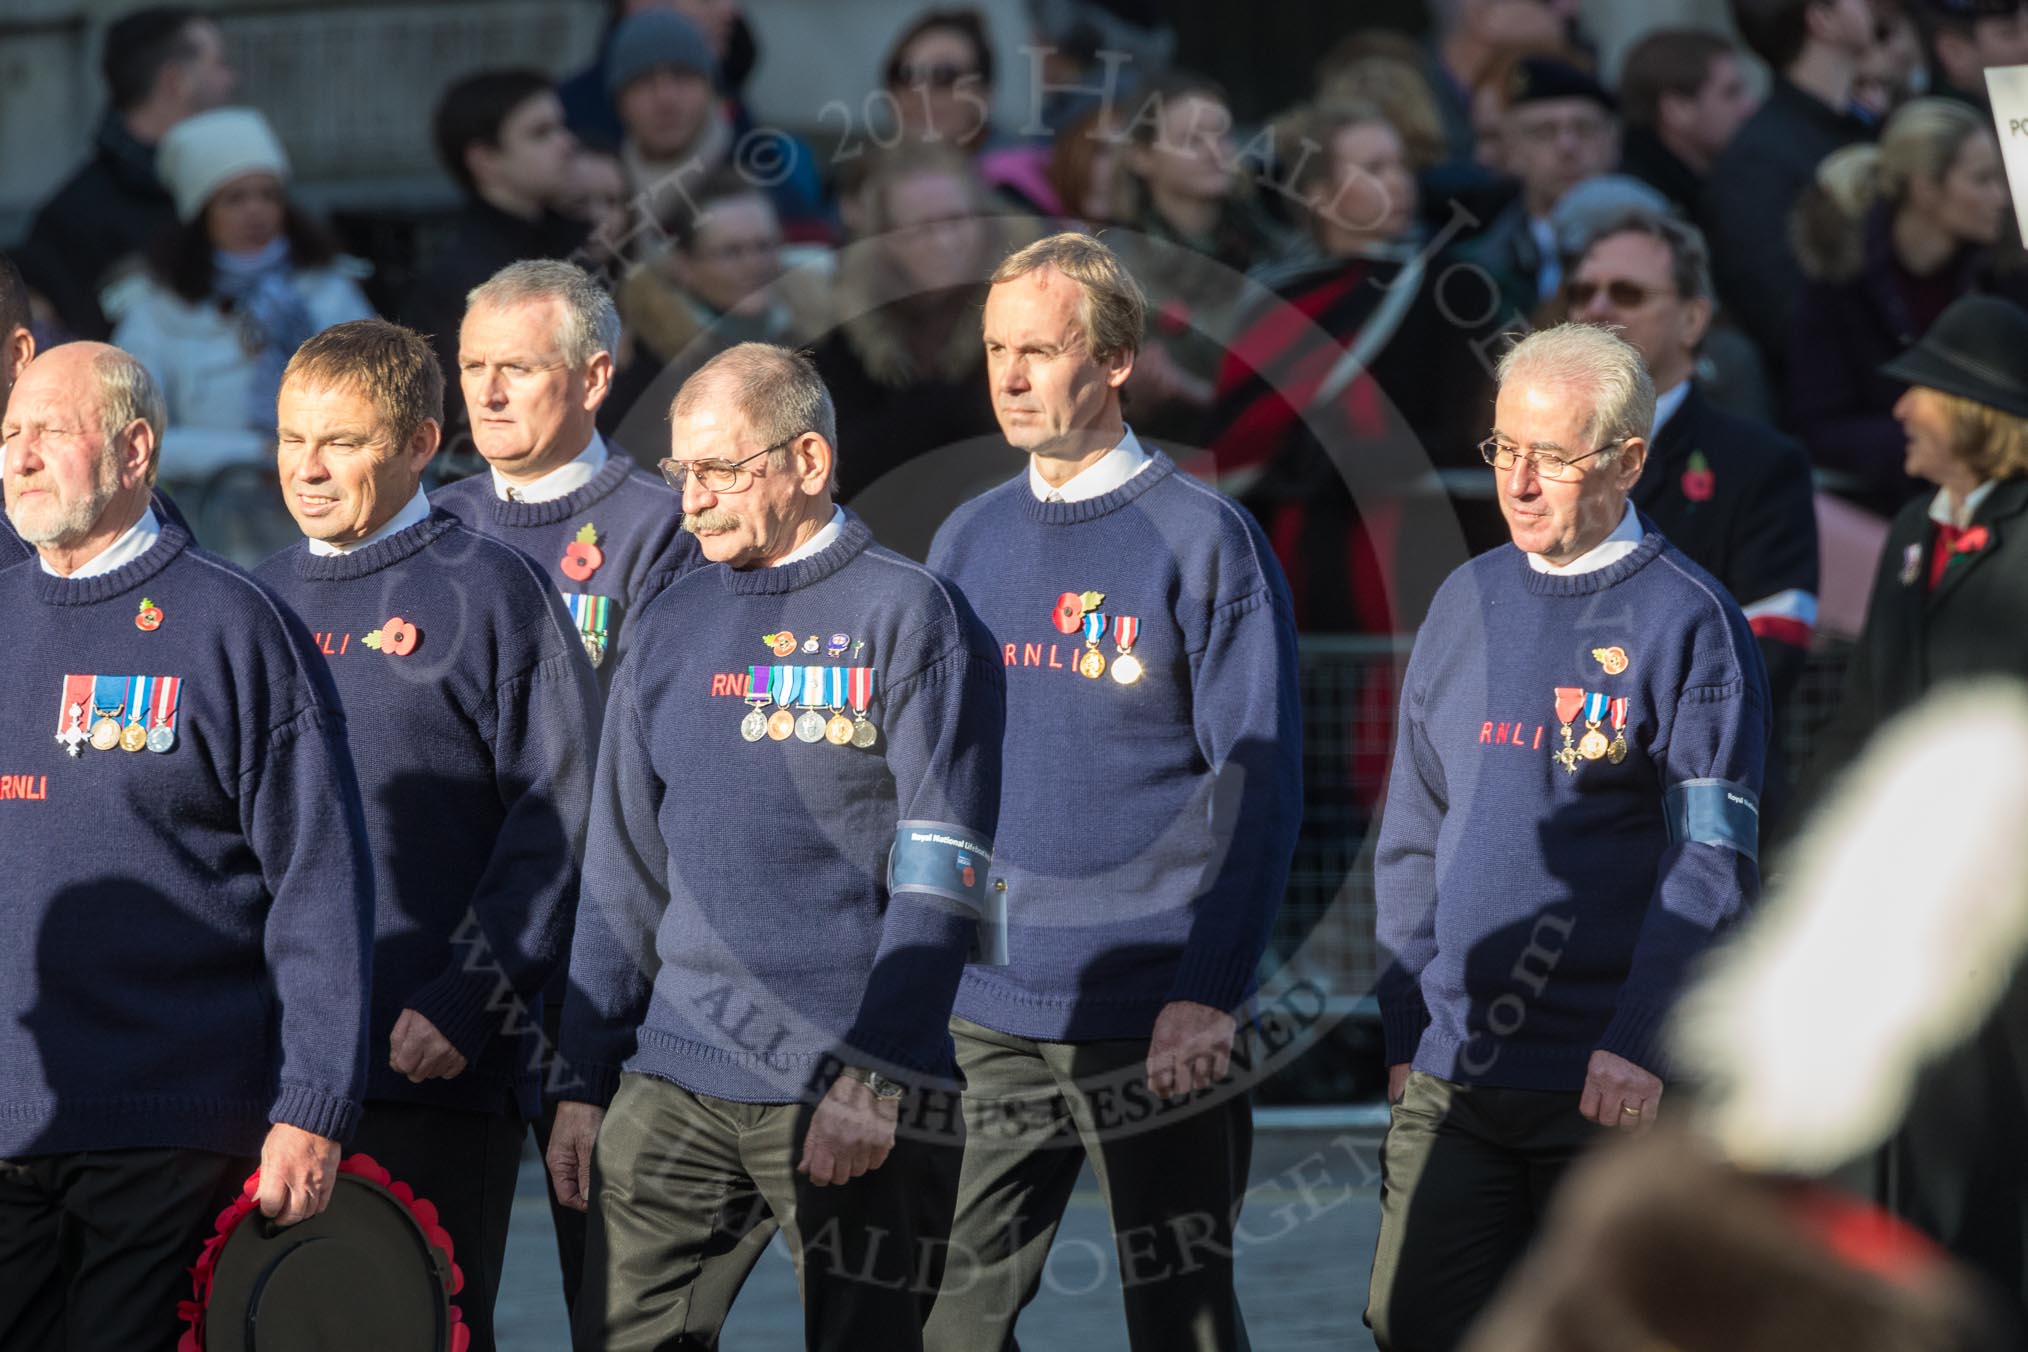 March Past, Remembrance Sunday at the Cenotaph 2016: M41 Royal National Lifeboat Institution.
Cenotaph, Whitehall, London SW1,
London,
Greater London,
United Kingdom,
on 13 November 2016 at 13:19, image #2956